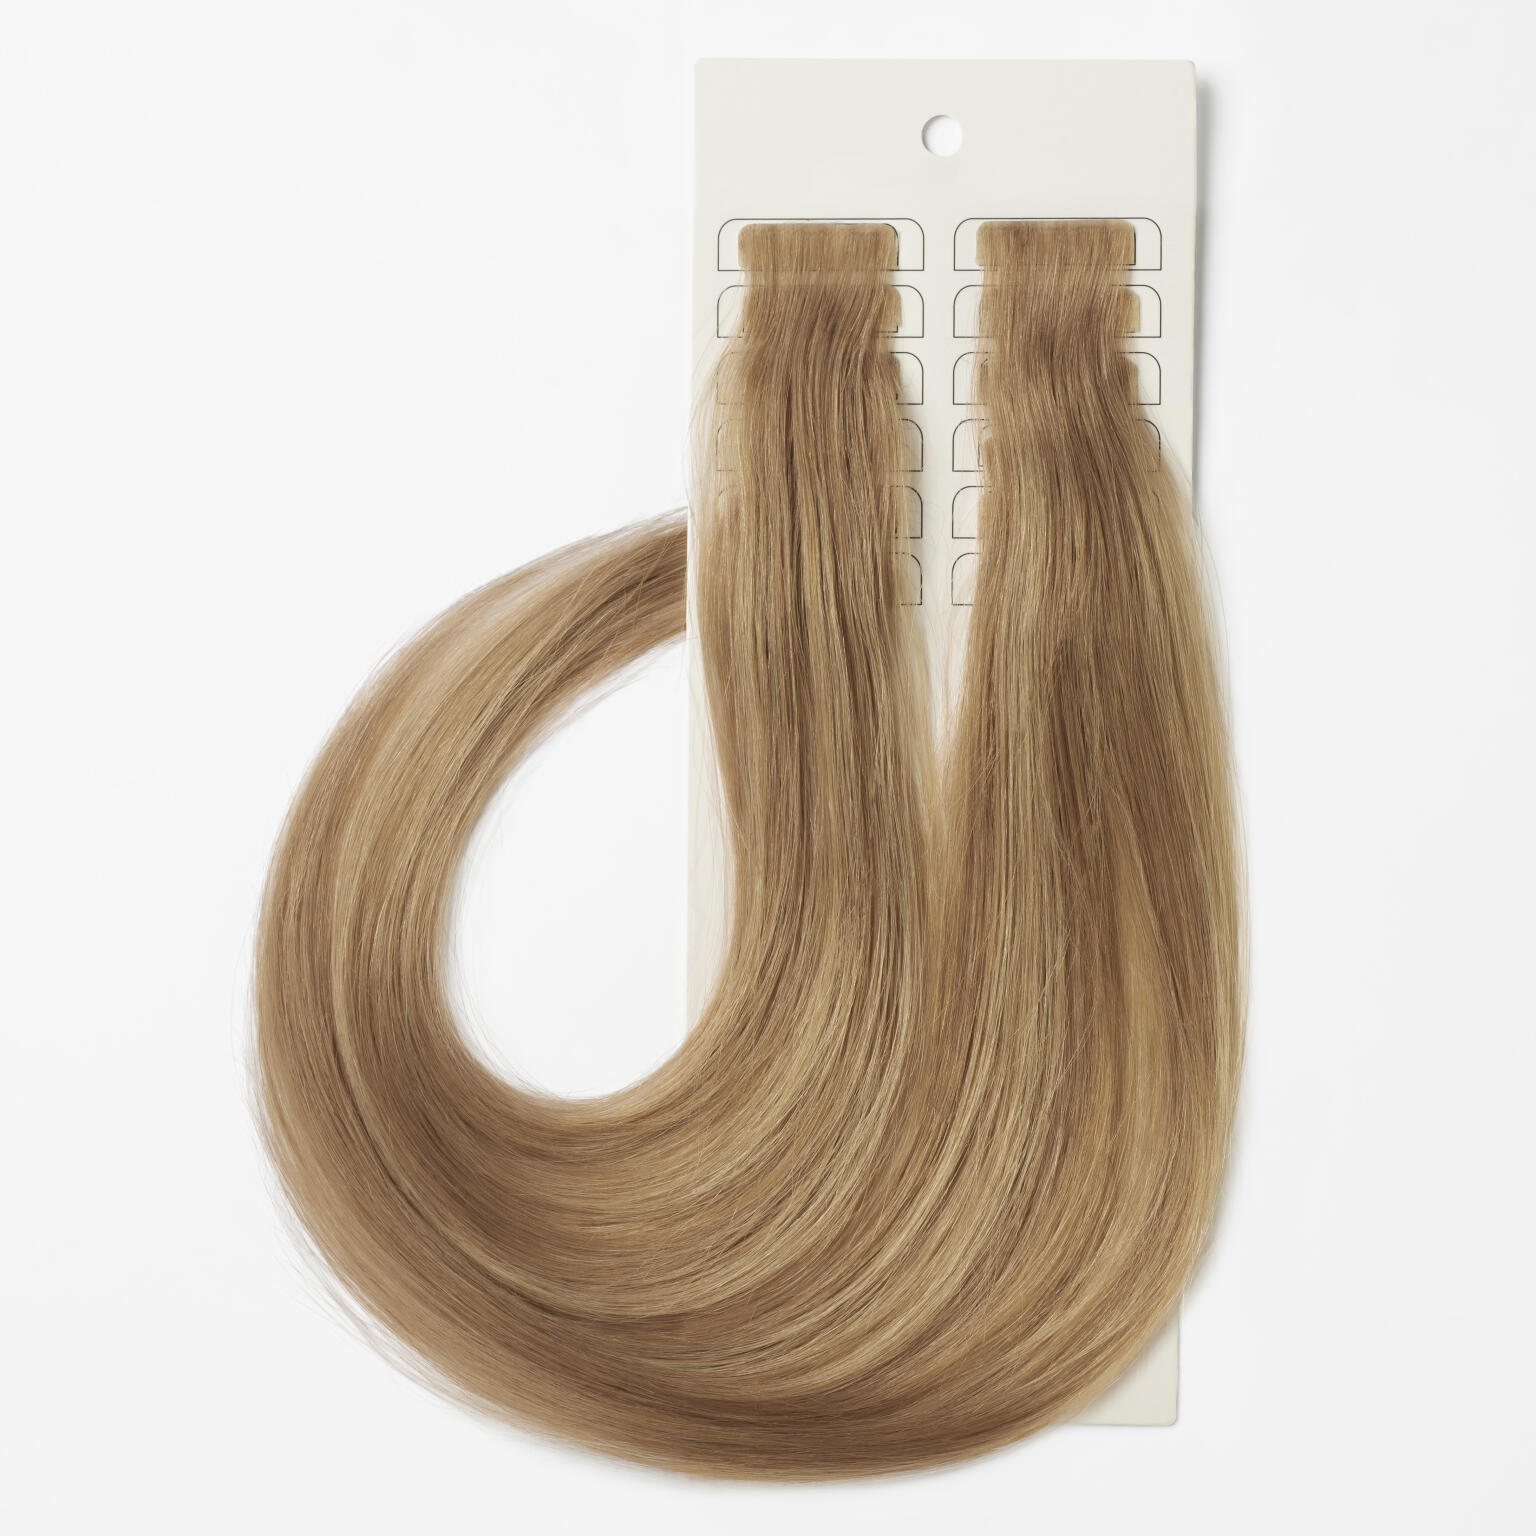 Luxe Tape Extensions Seamless 3 CM9.89/10.89 30 cm